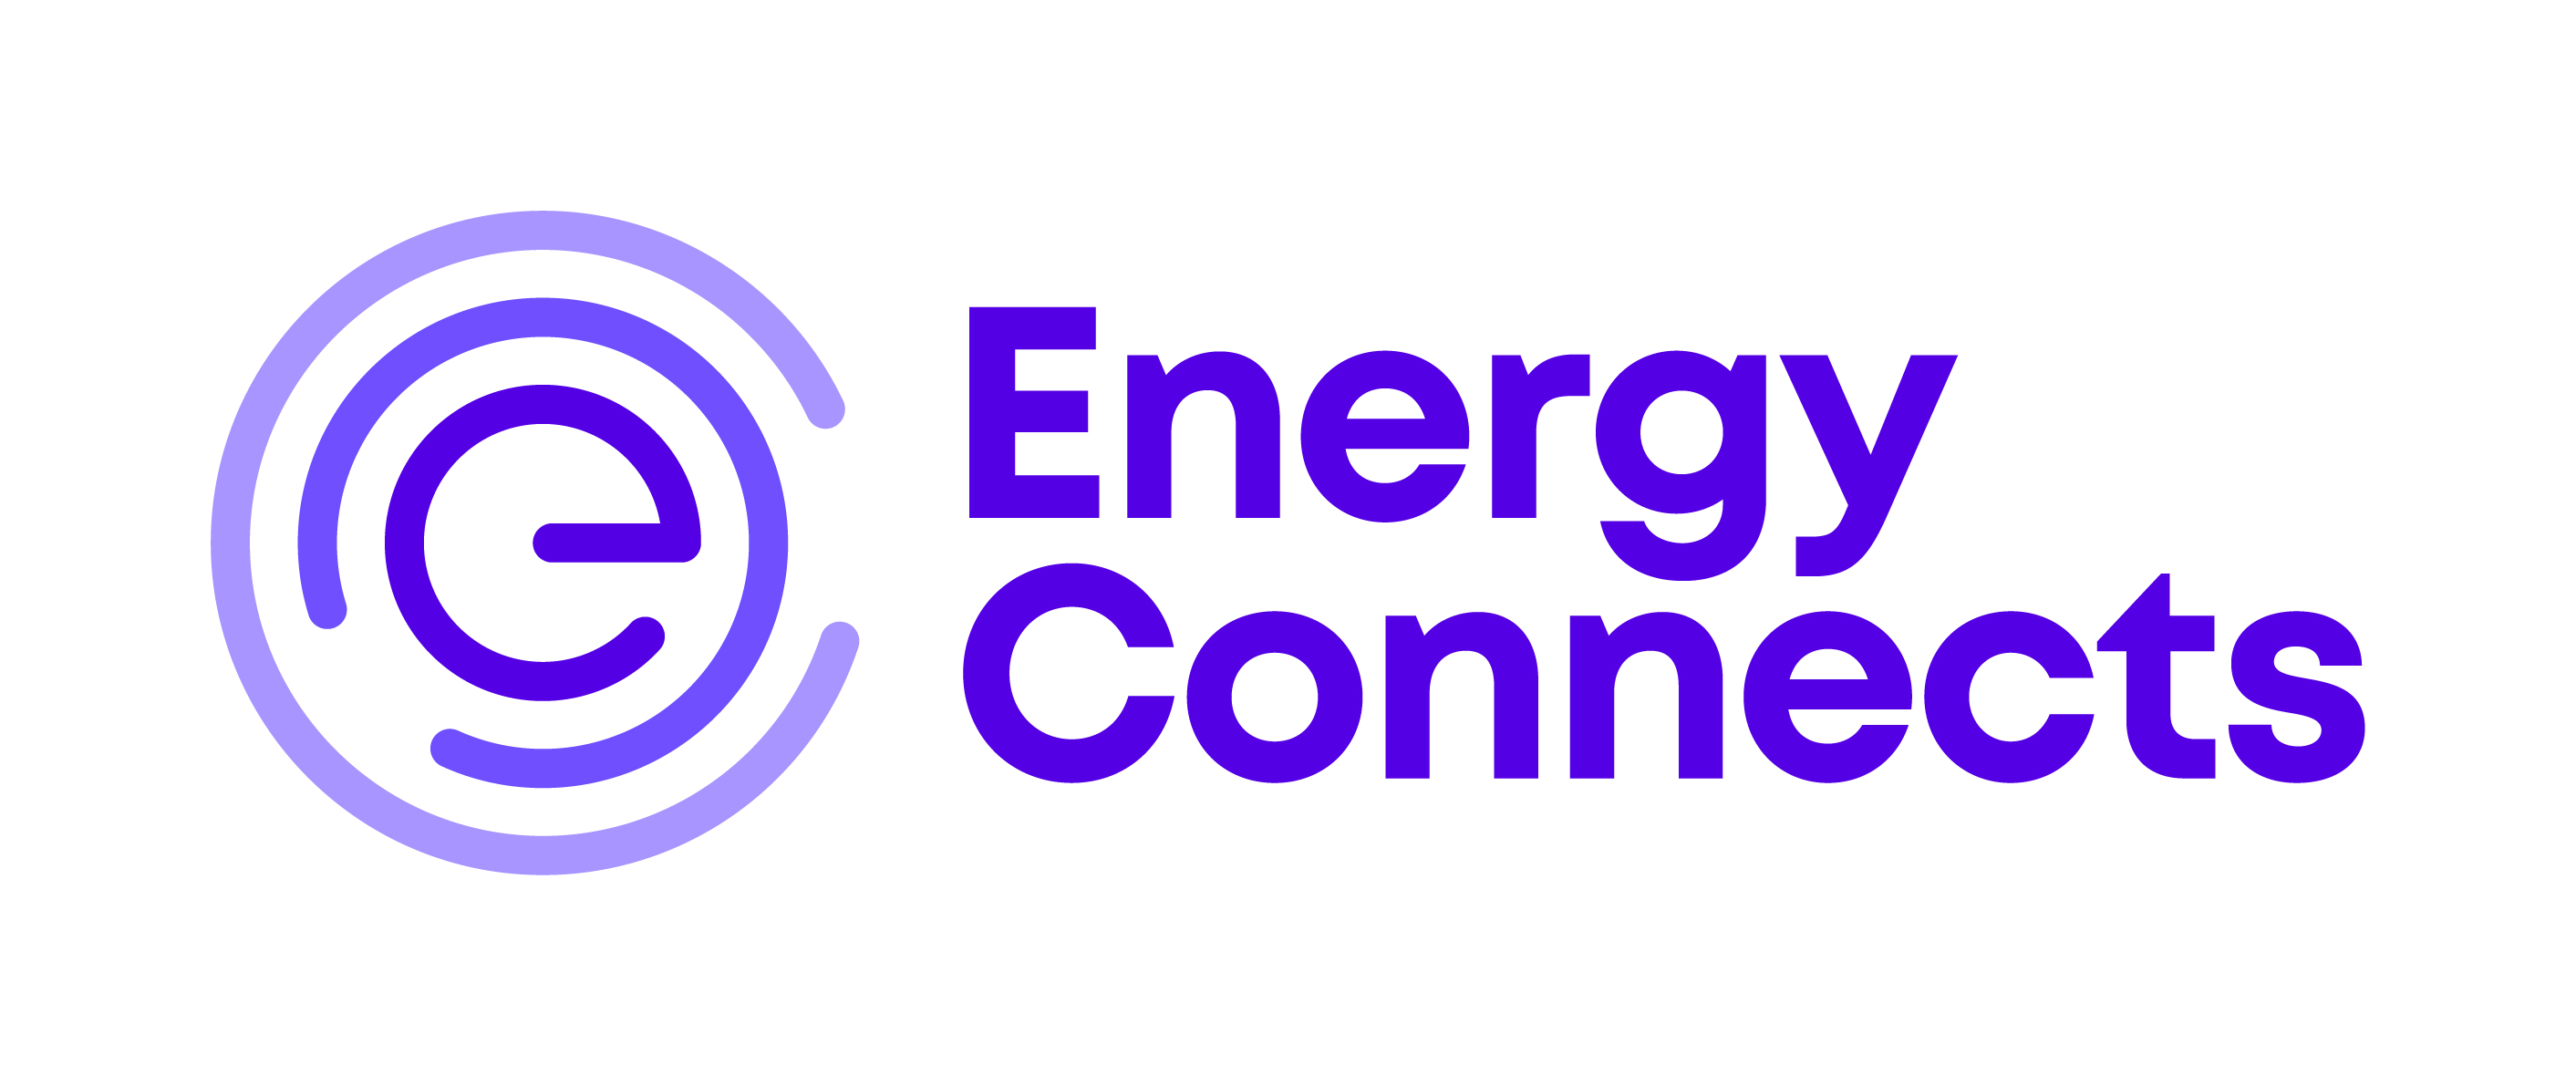 Energy Connects Logo